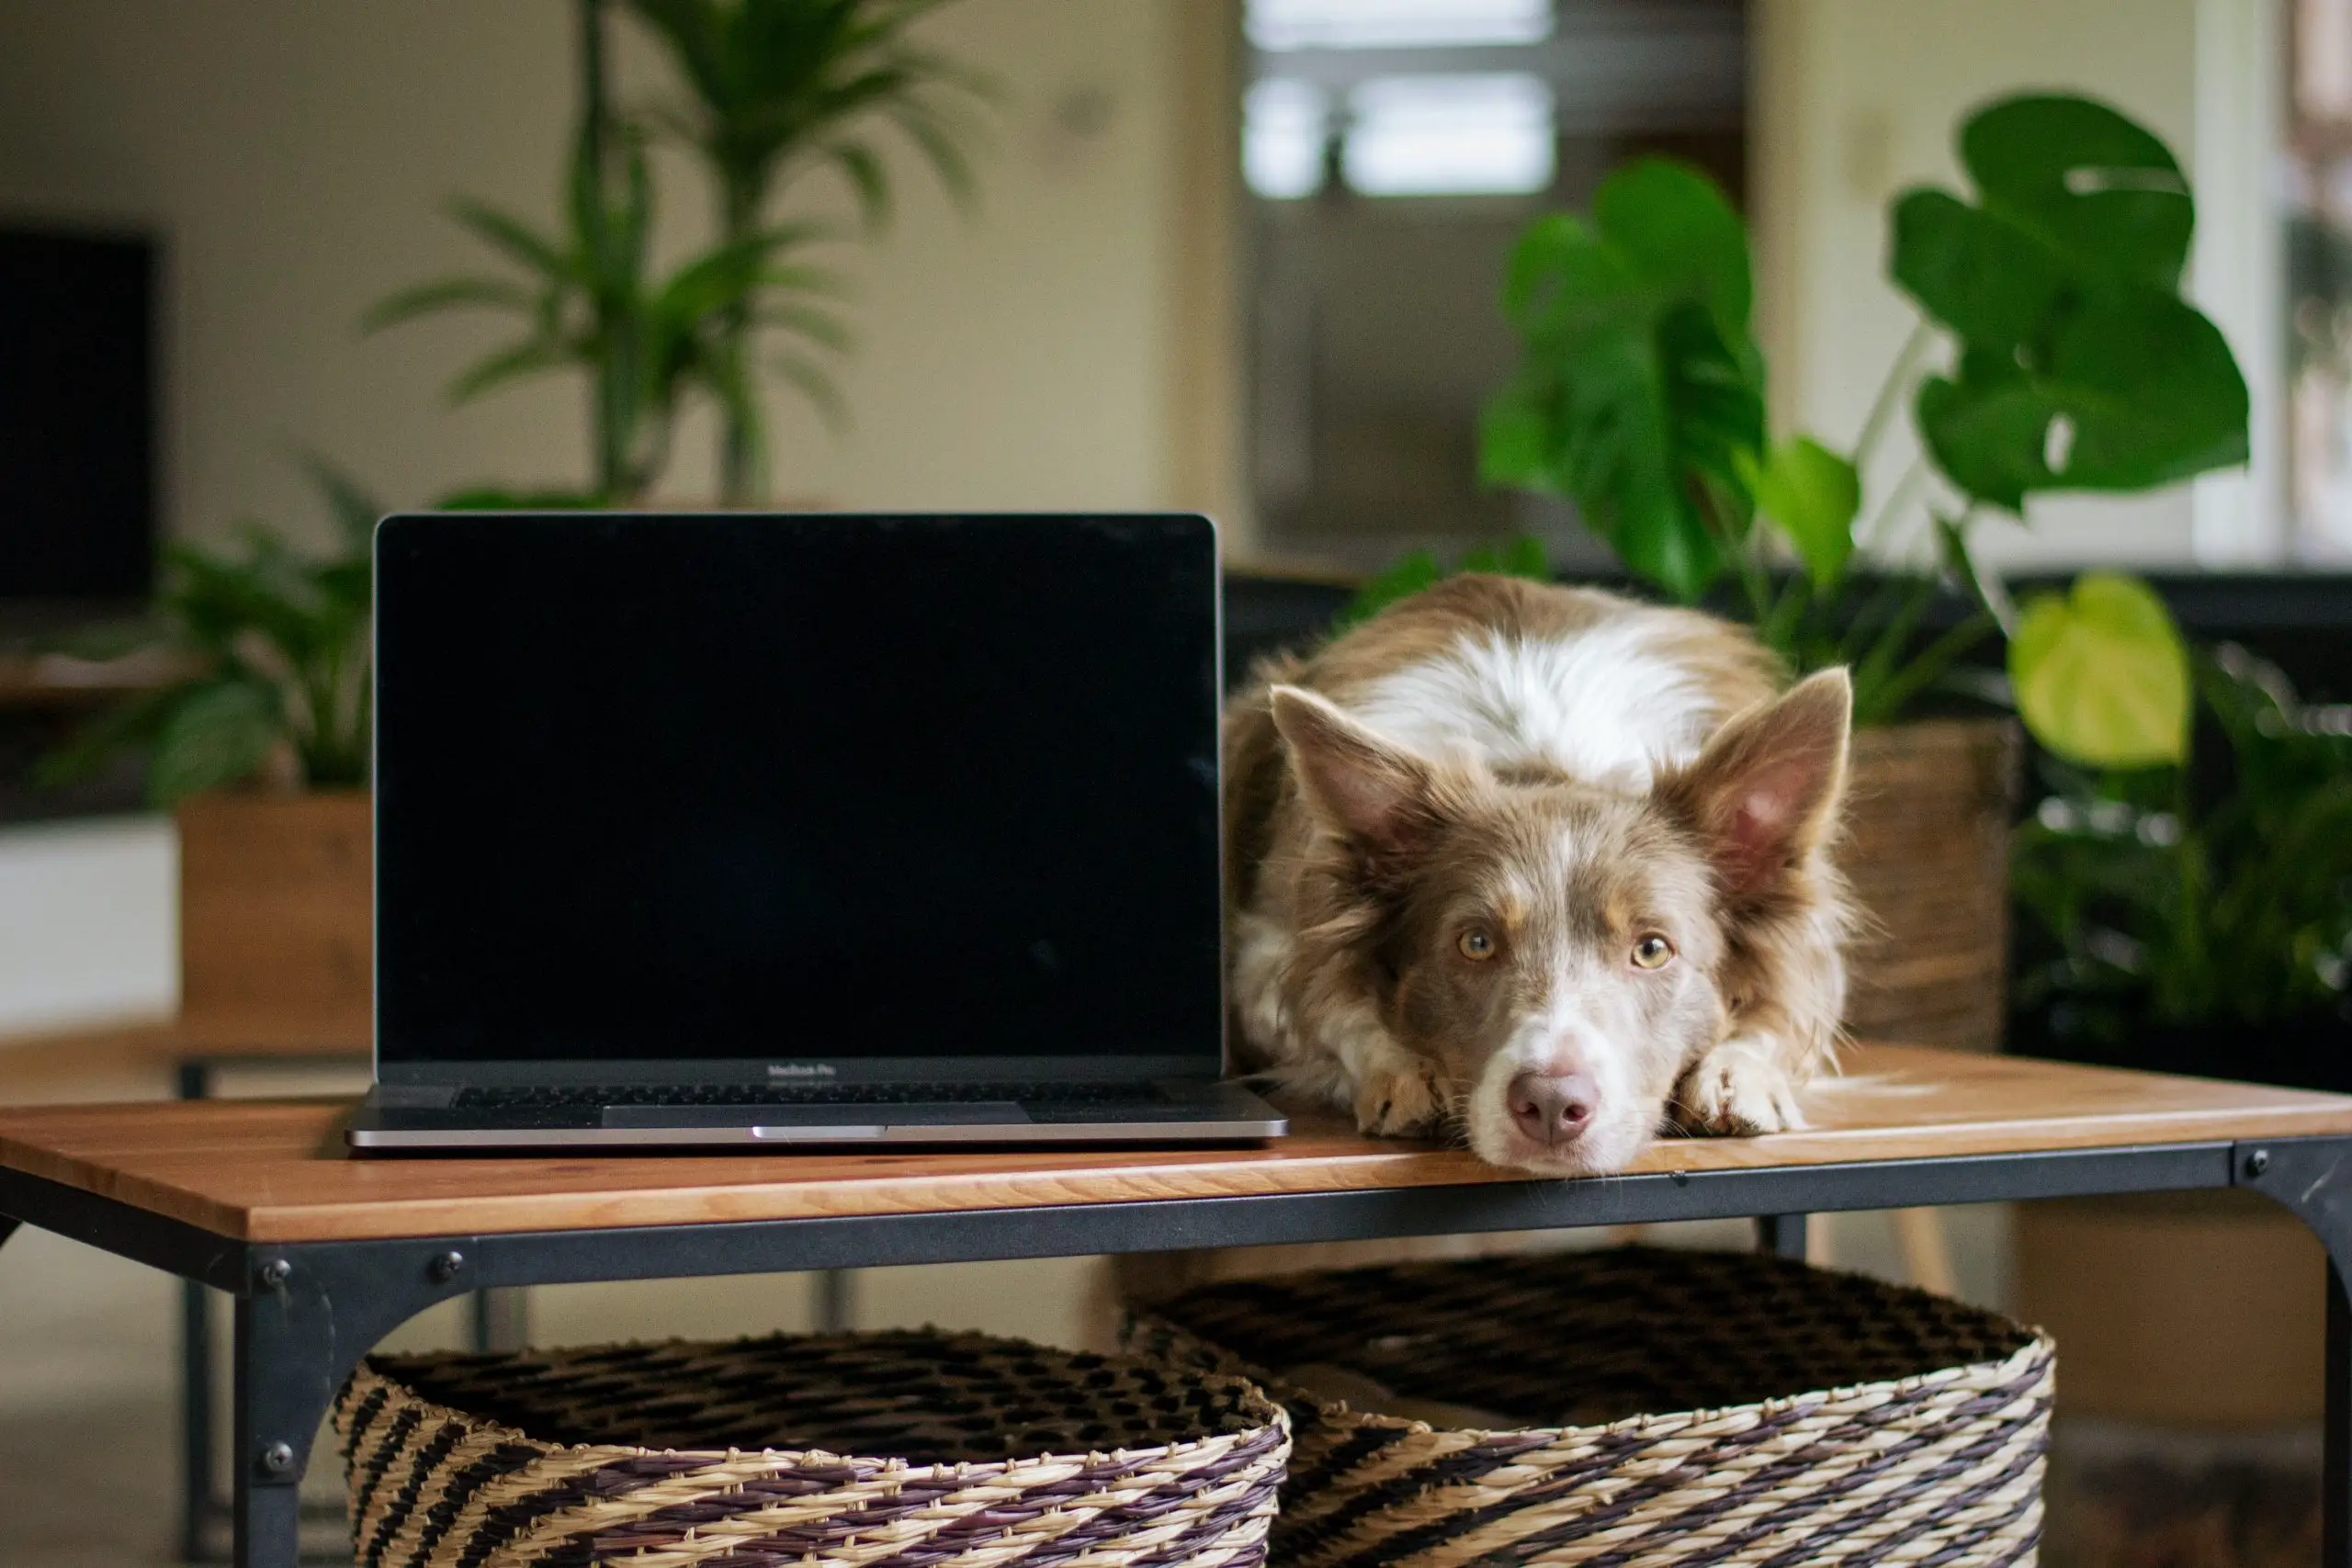 How To Keep A Border Collie Entertained While At Work